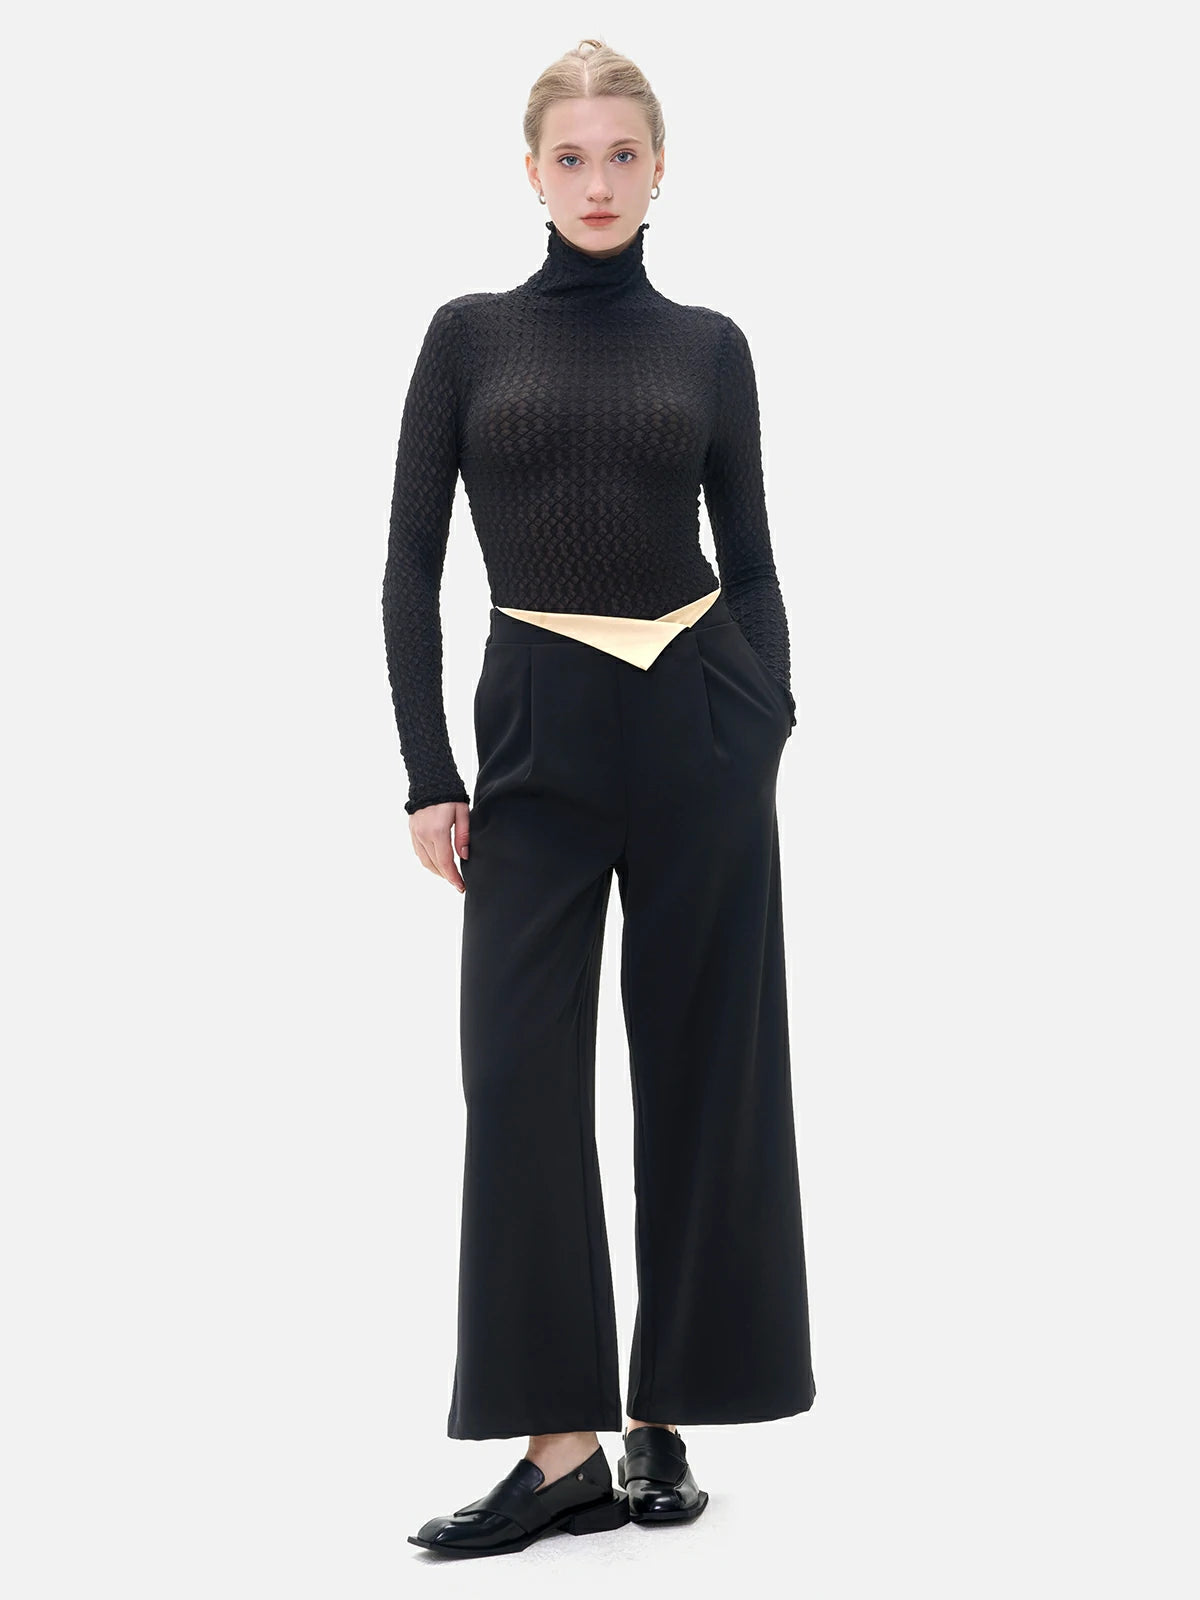 Fashionable wide-leg pants with a distinctive color-blocking flip at the waist, elevating the style quotient